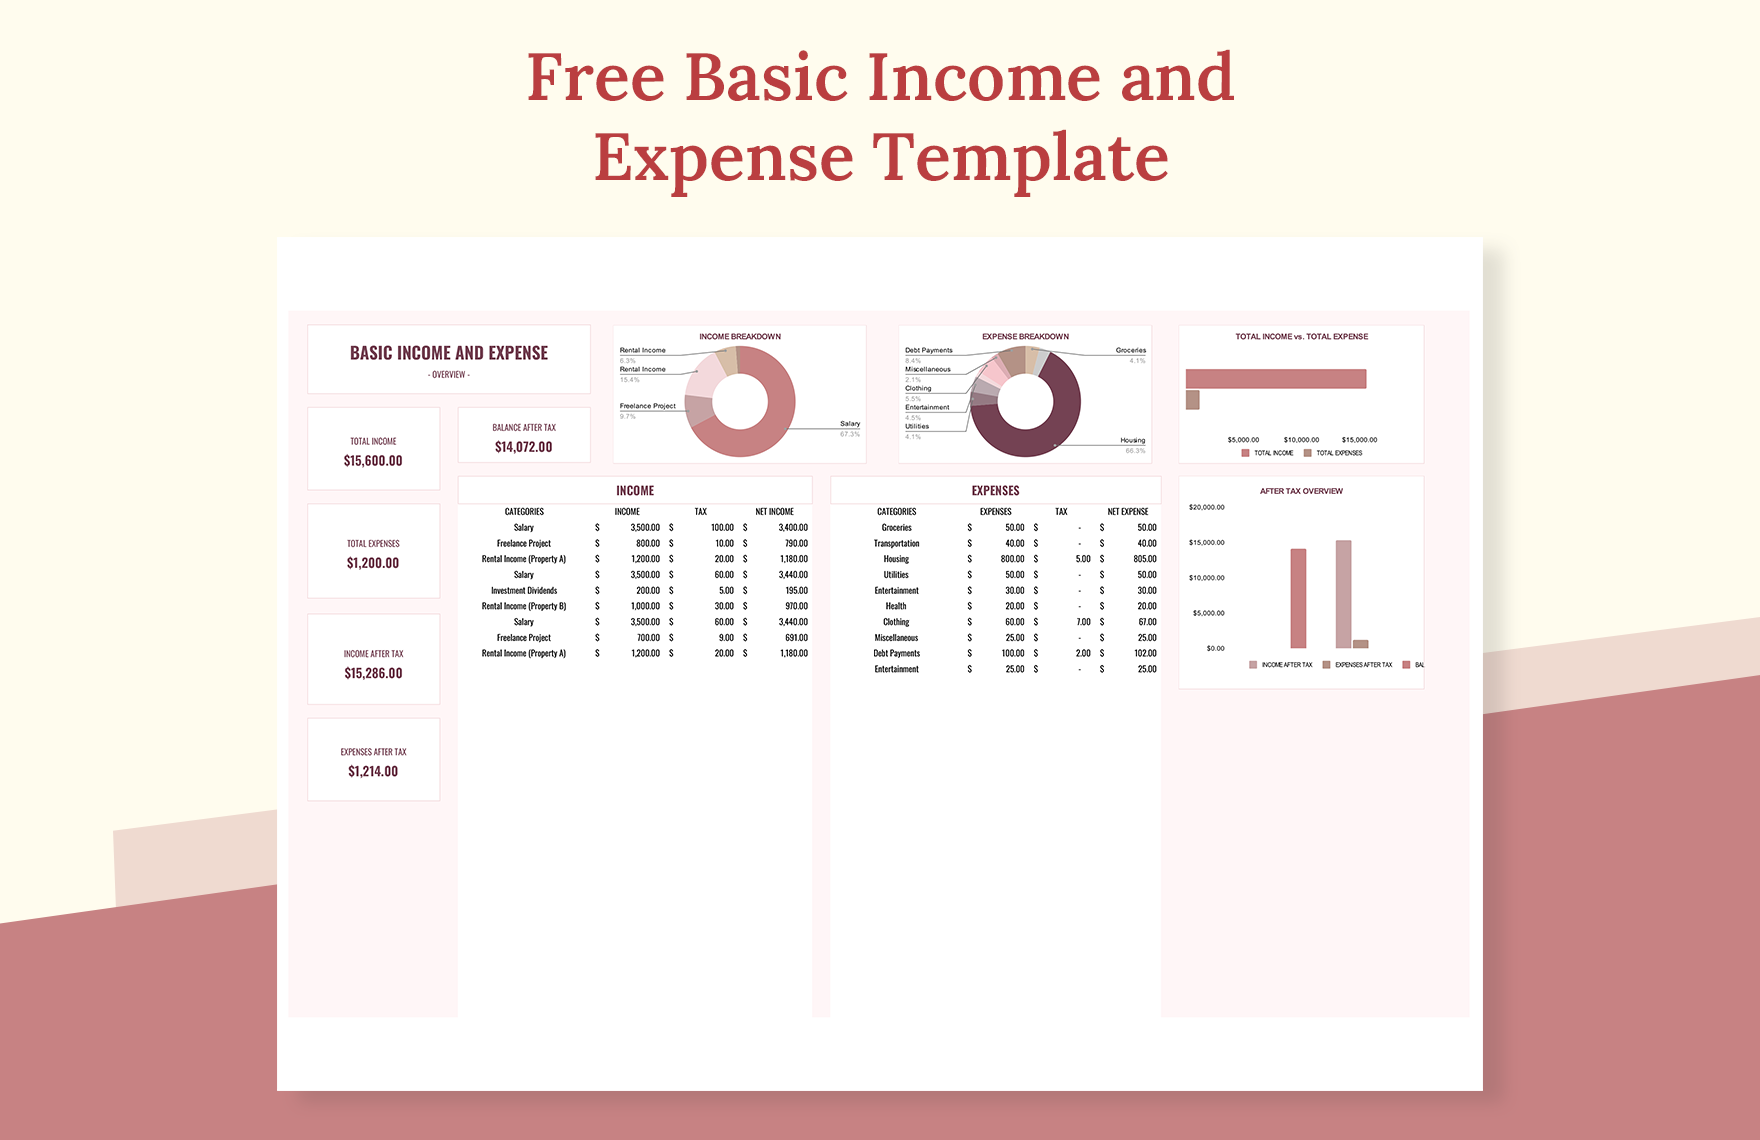 Free Basic income and expense template in Excel, Google Sheets